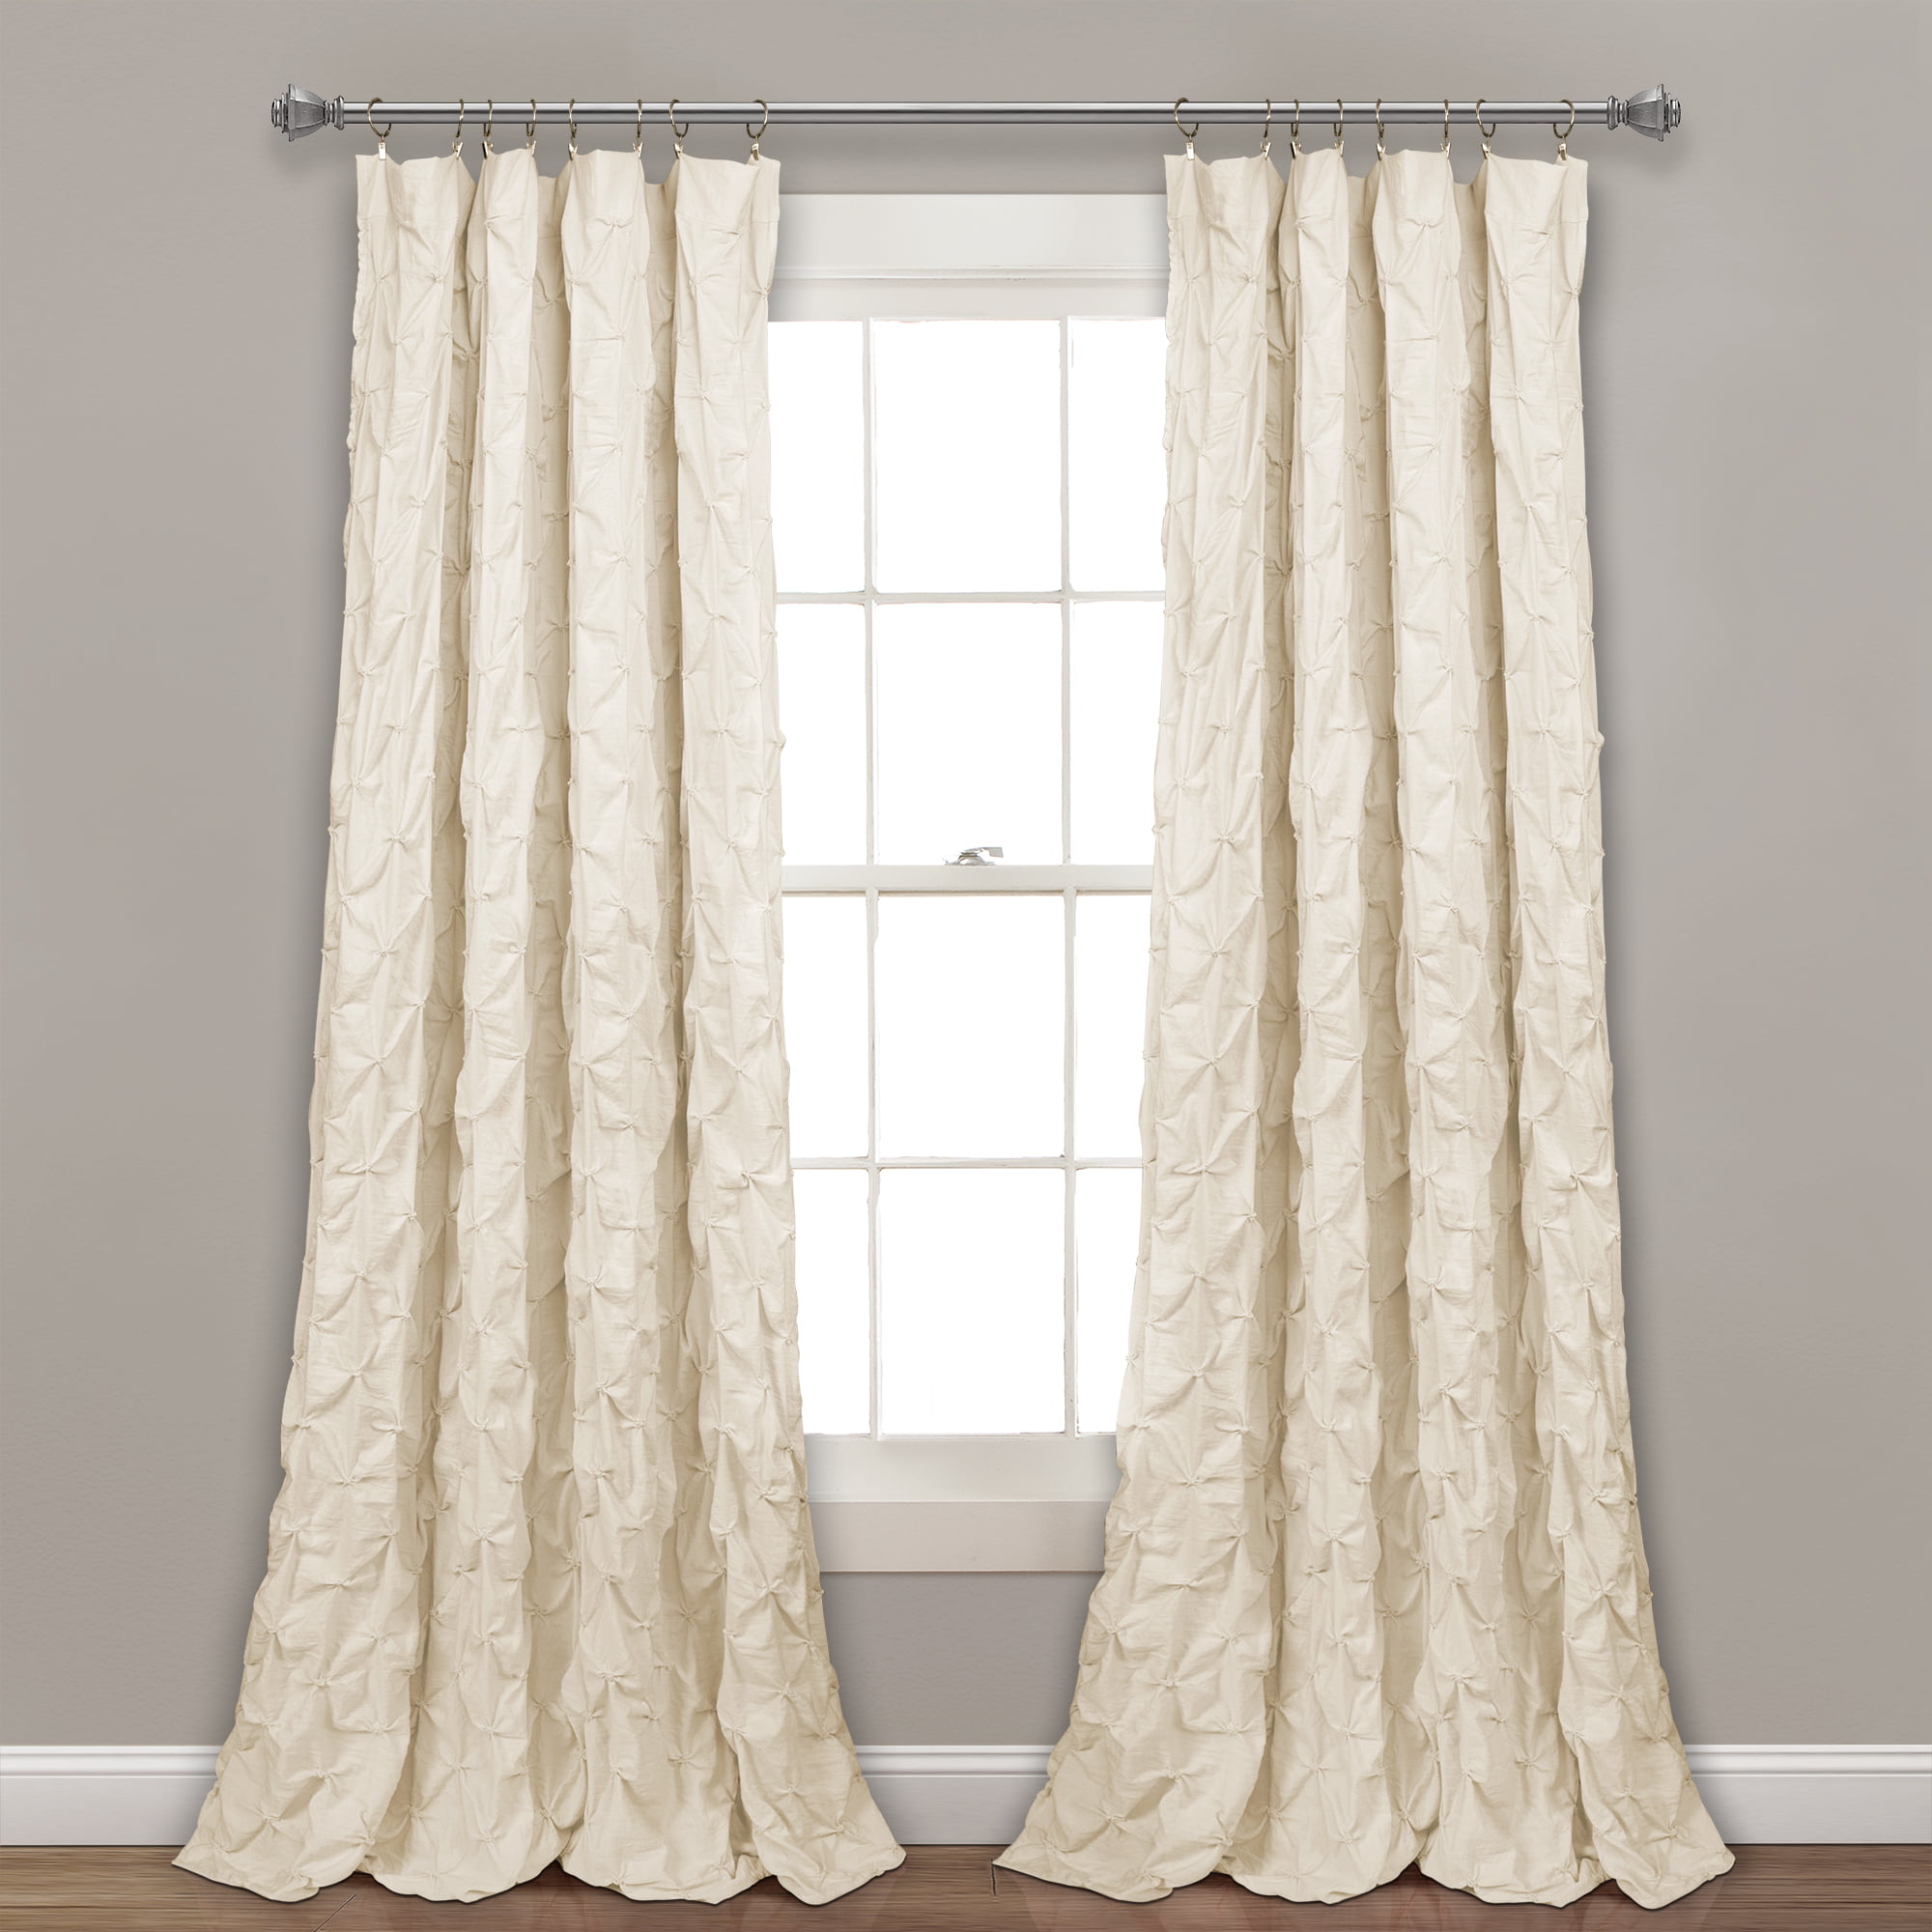 Wheat 38 x 84 84 L Lush Decor Ravello Absolute Blackout Insulated Grommet Window Curtain Panel Pair Ivory